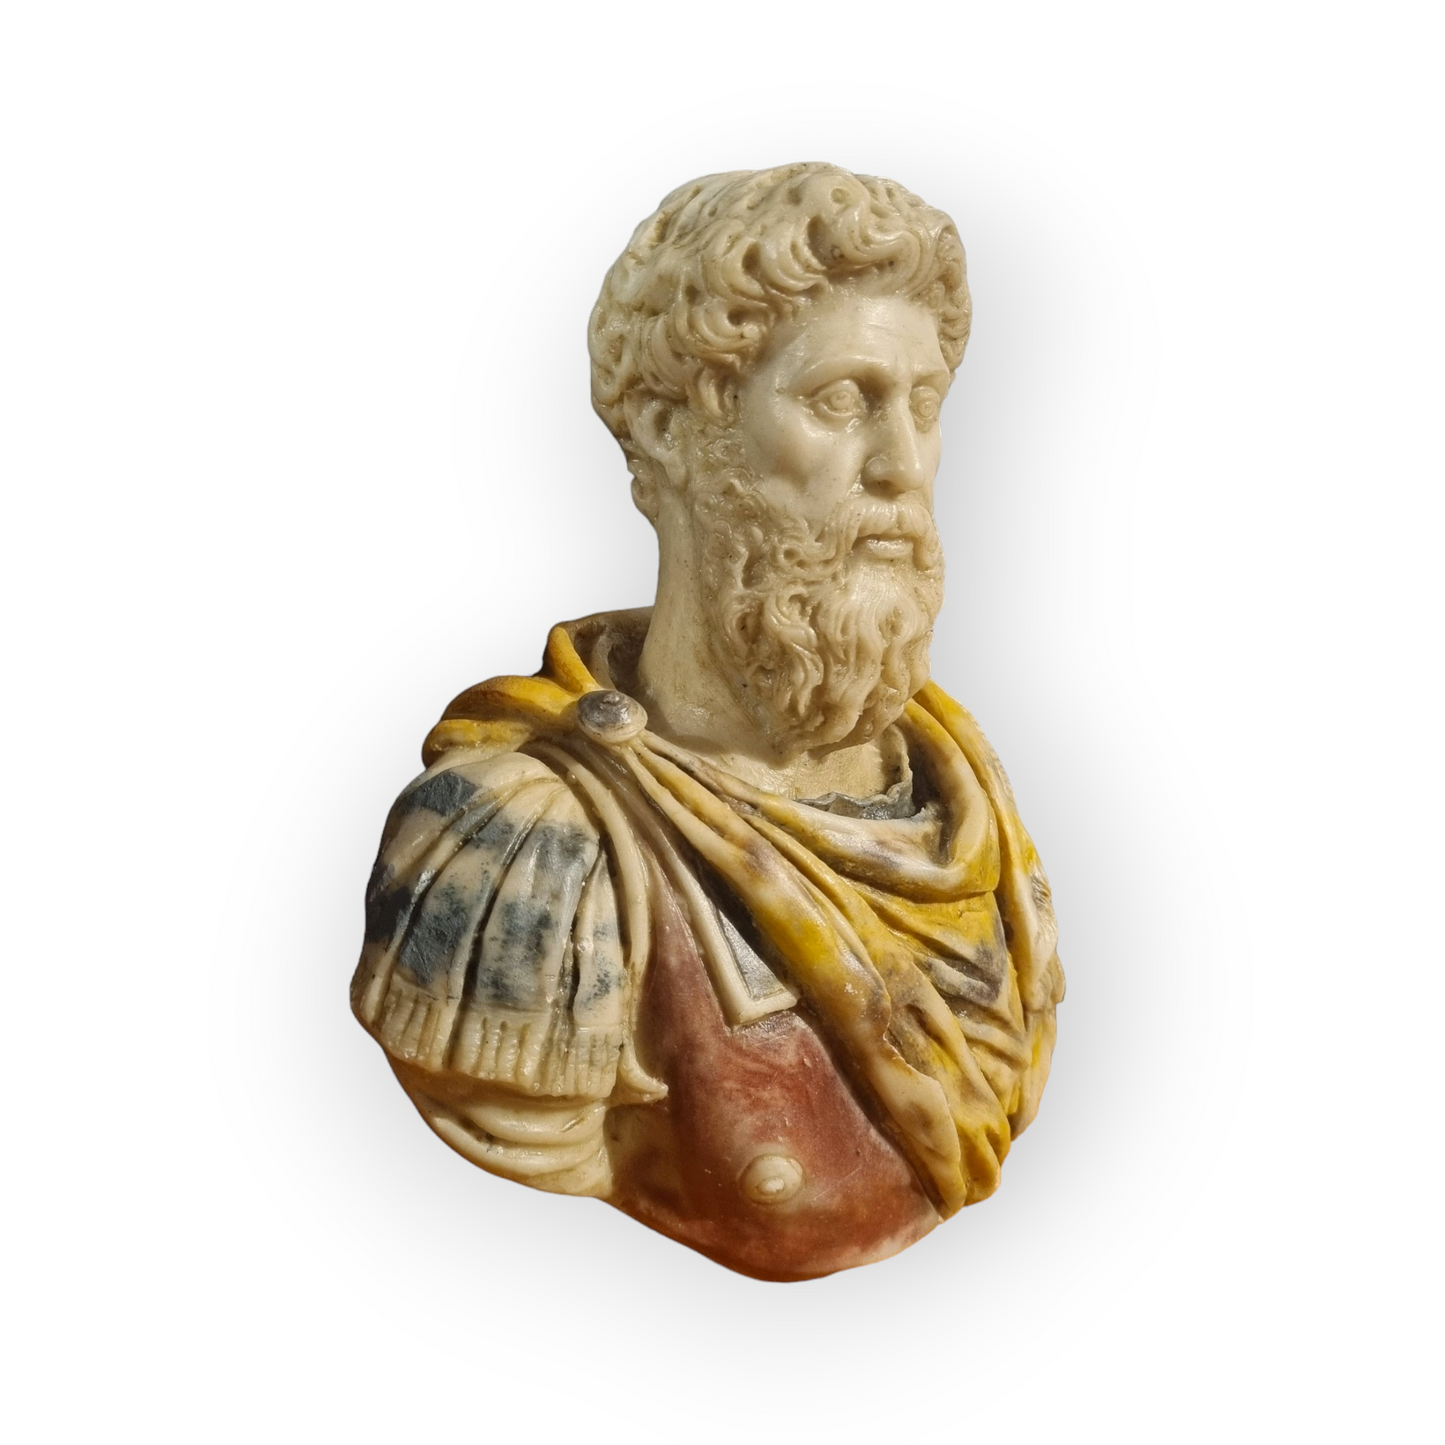 Grand Tour Interest - A Diminutive Roman Antique Reconstituted Stone / Marble Bust of Marcus Aurelius in the Classical Manner